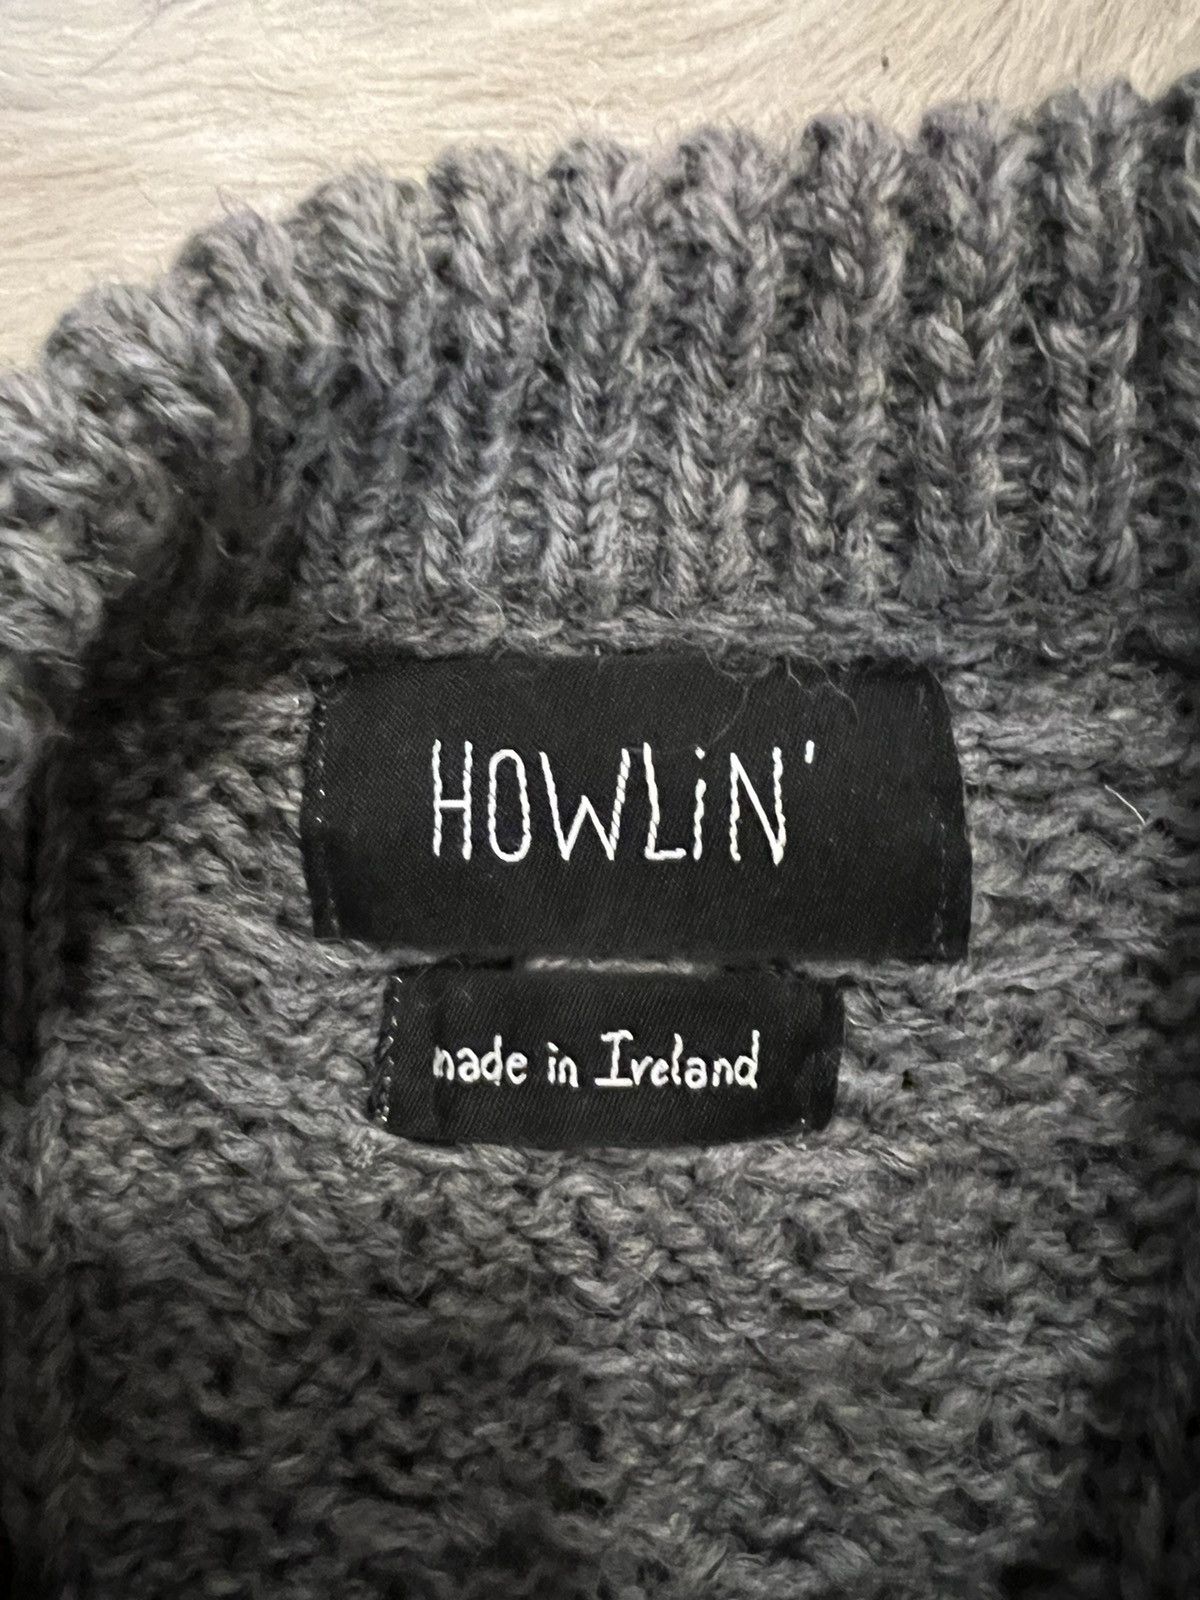 Howlin By Morrison Howlin 100% wool sweater Size US S / EU 44-46 / 1 - 2 Preview